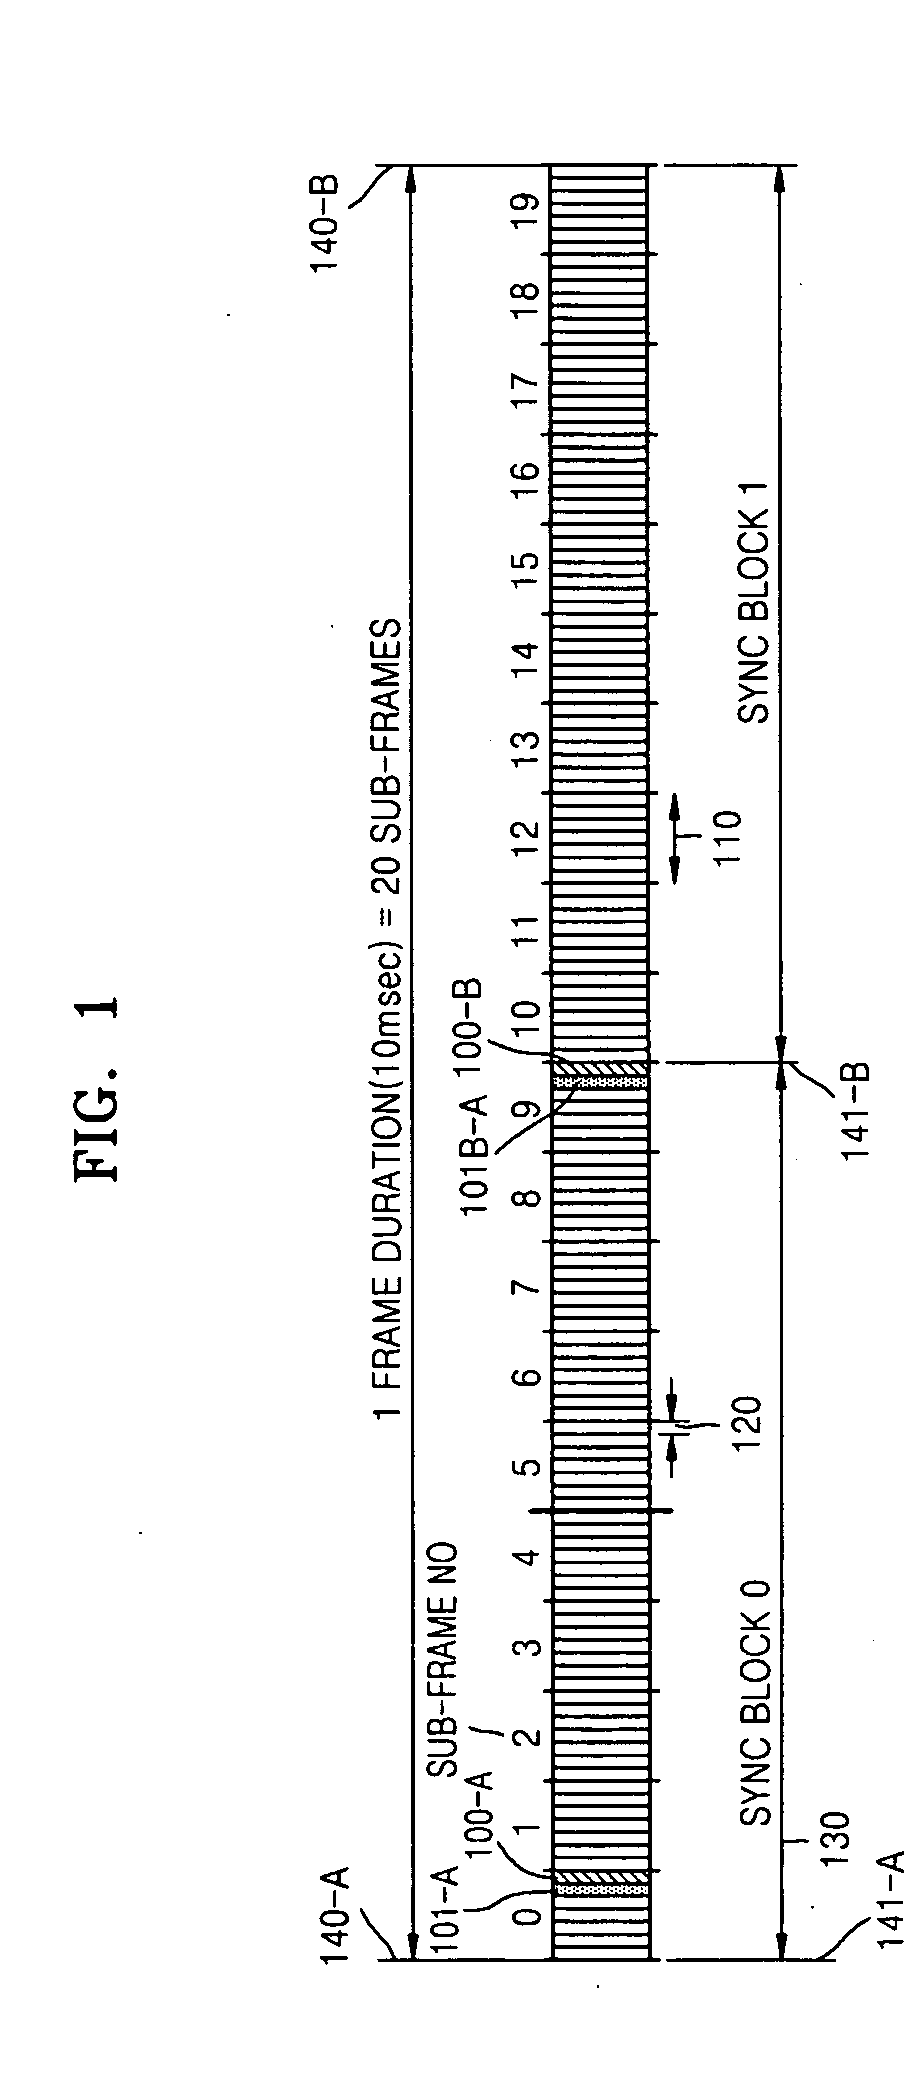 Tdm based cell search method for OFDM system